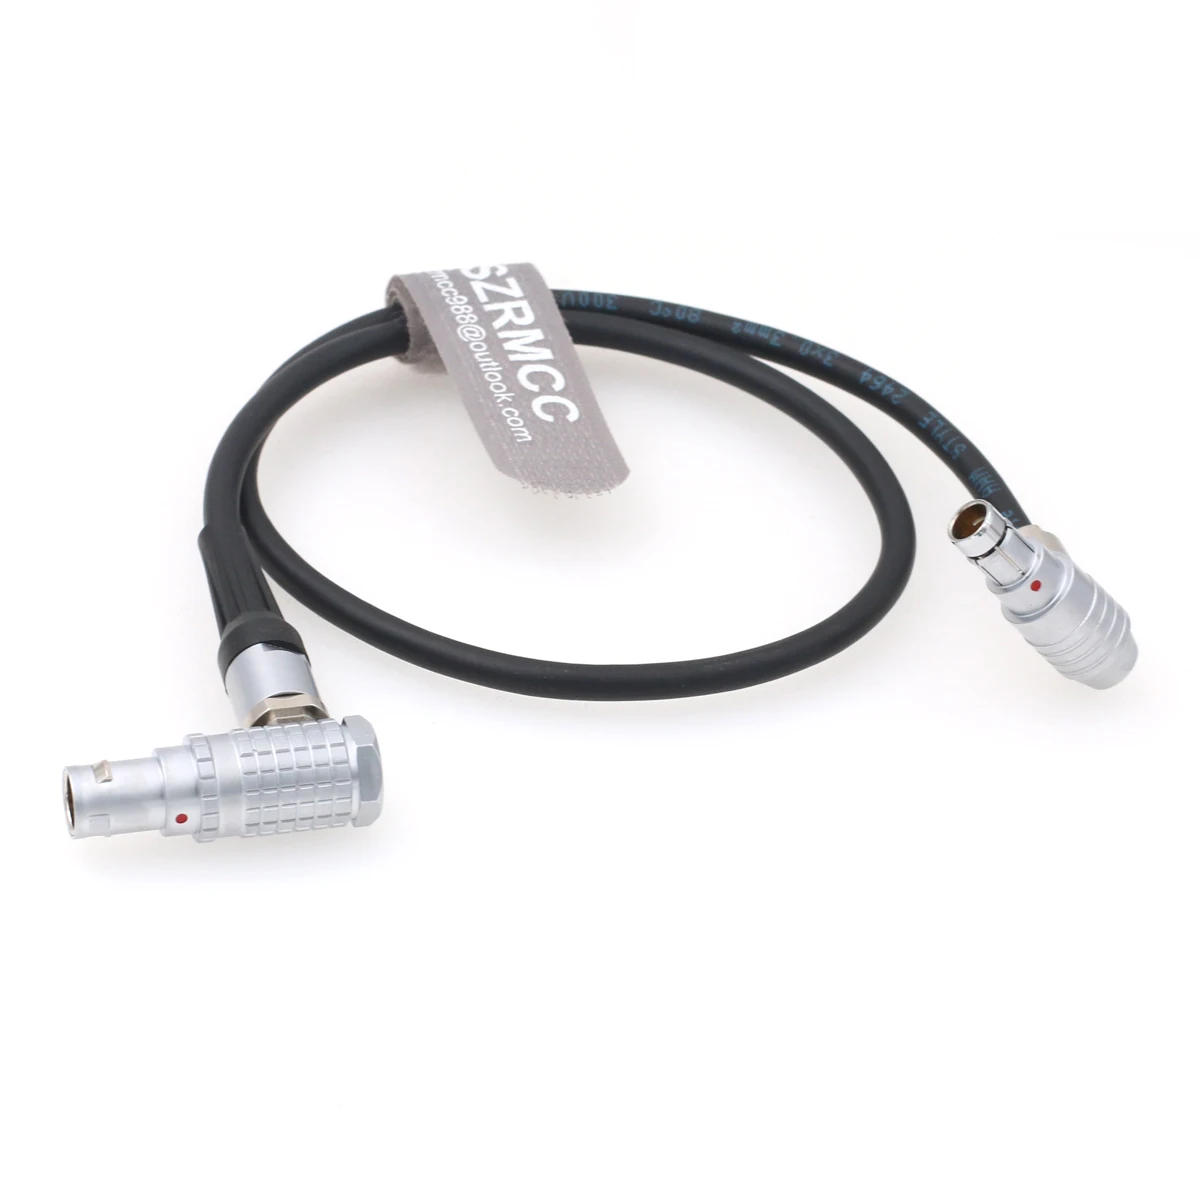 

Preston MDR-3 MDR-4 10 Pin to Right Angle Fischer 3 Pin Run/Stop Power Cable for RED ARRI Alexa Camera